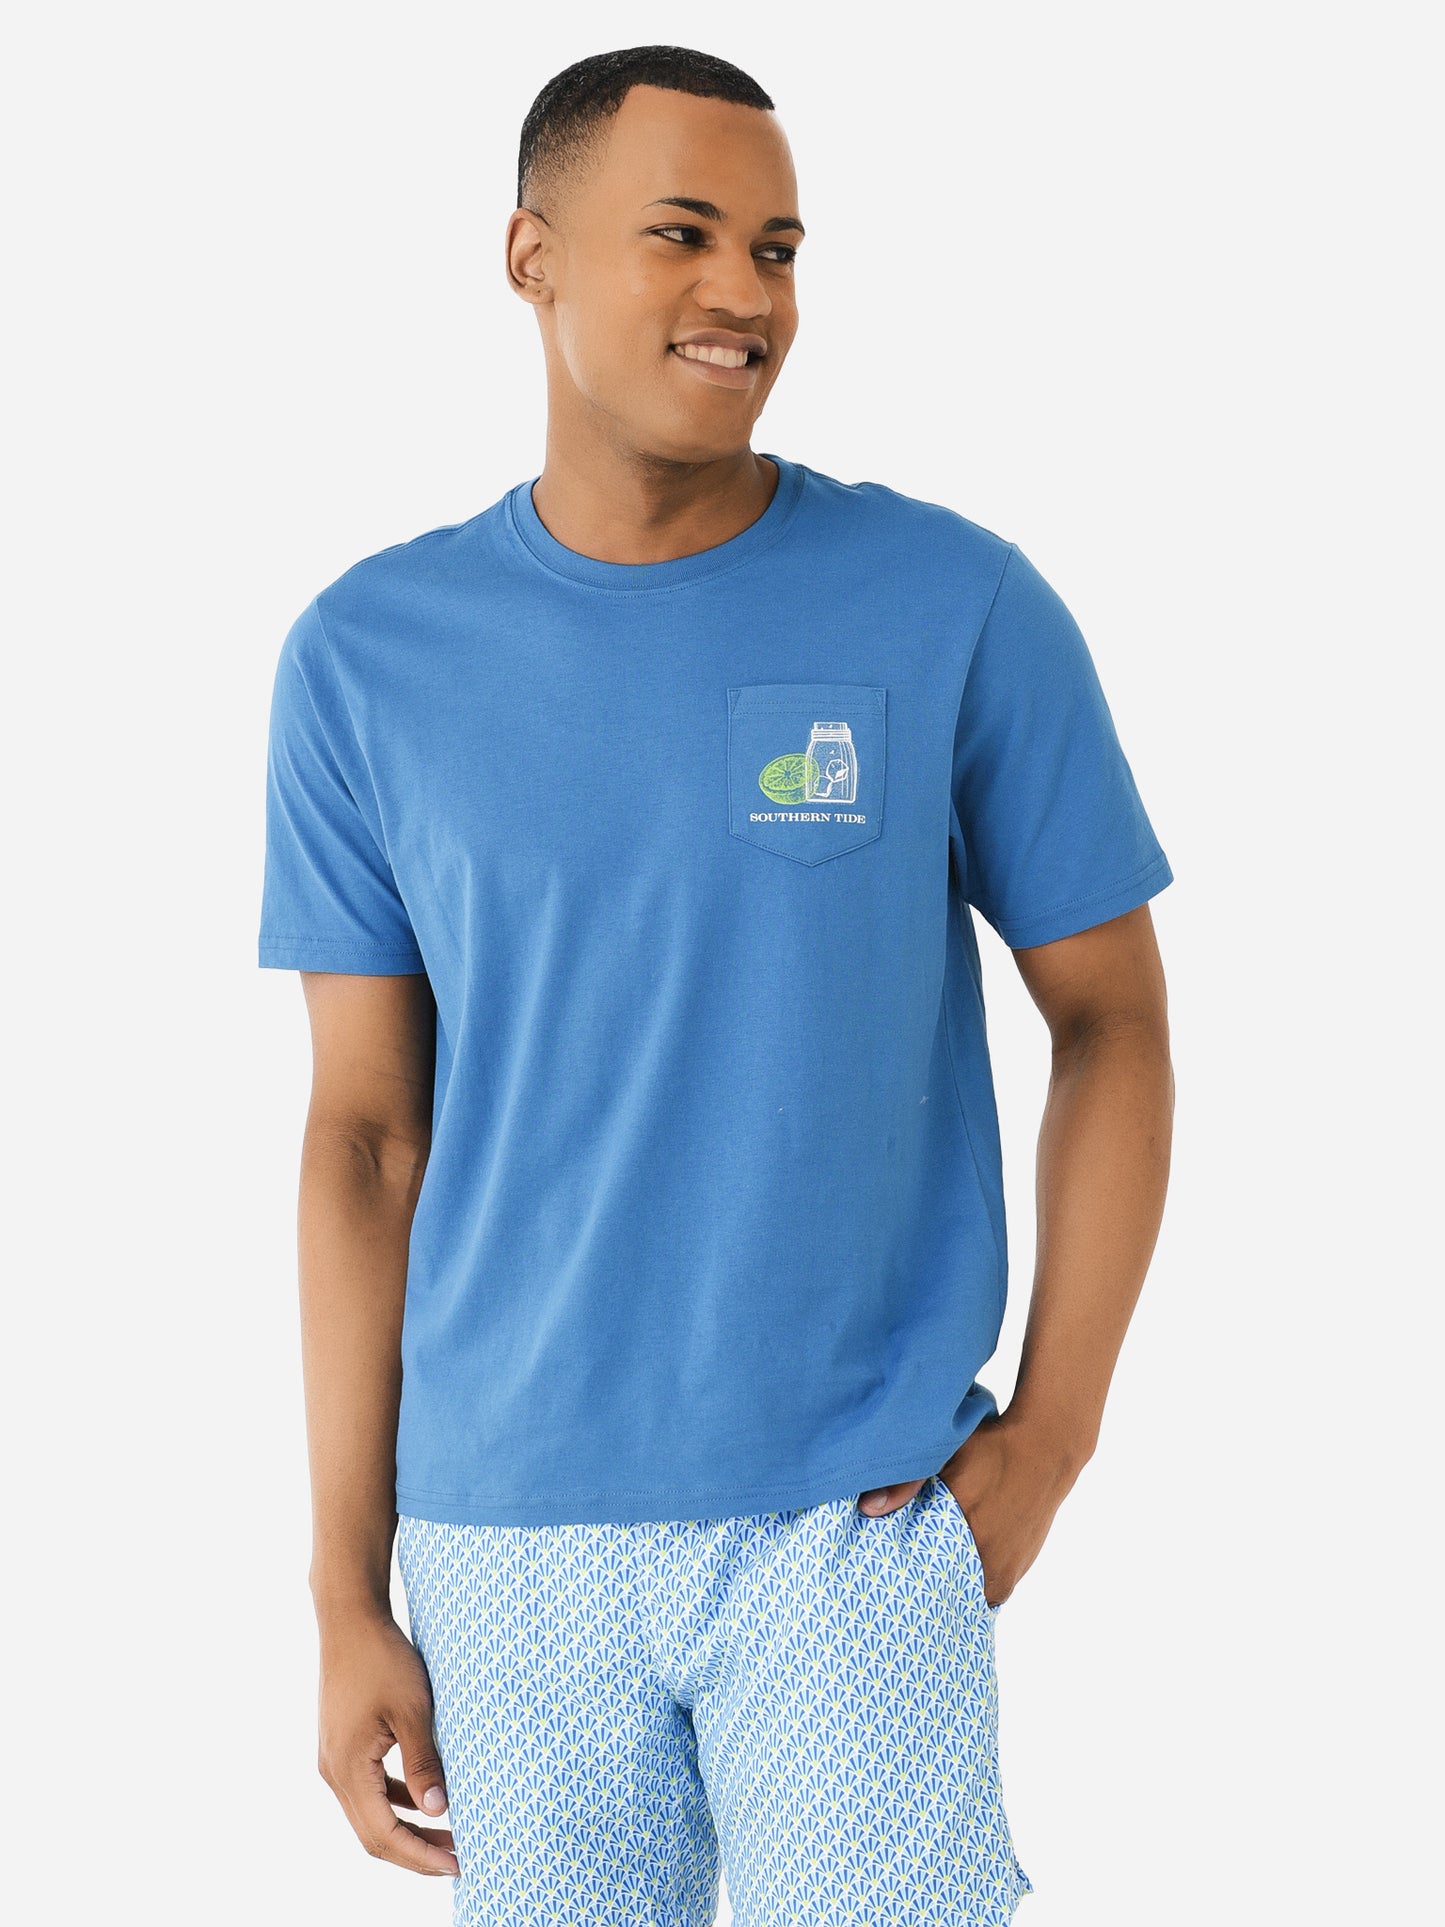 Southern Tide Men's Tap Schematic T-Shirt